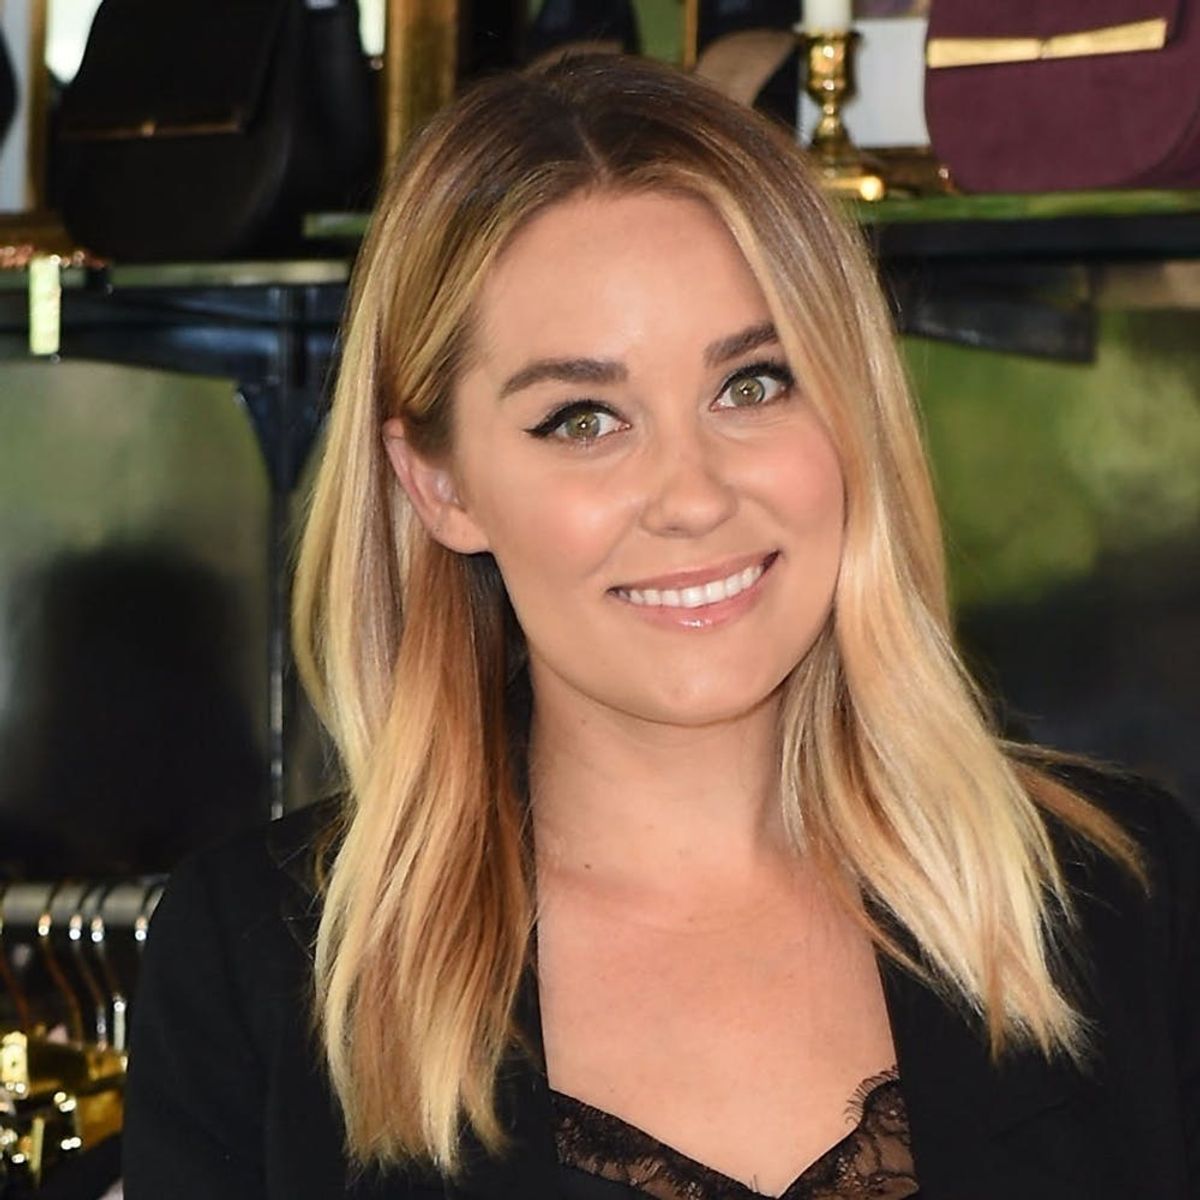 Lauren Conrad Just Dropped a Dreamy Maternity Collection for Summer